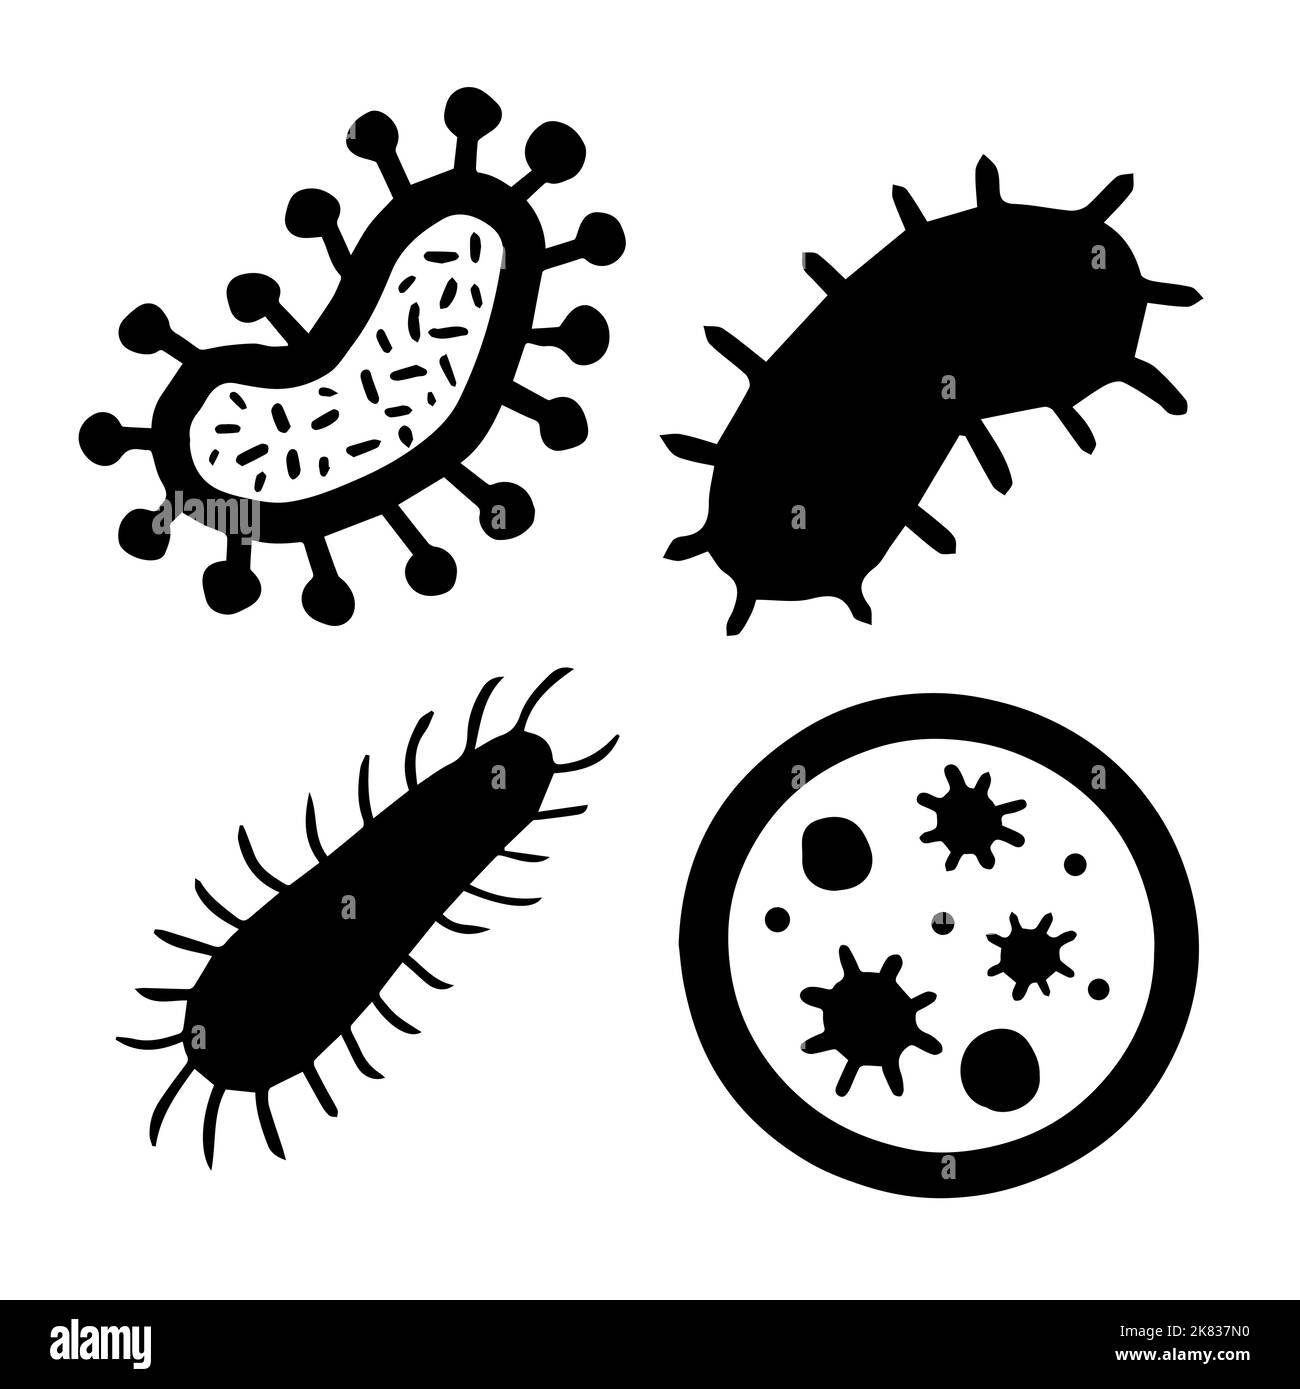 Microorganisms in vibrio coccus and bacilli shapes Stock Vector